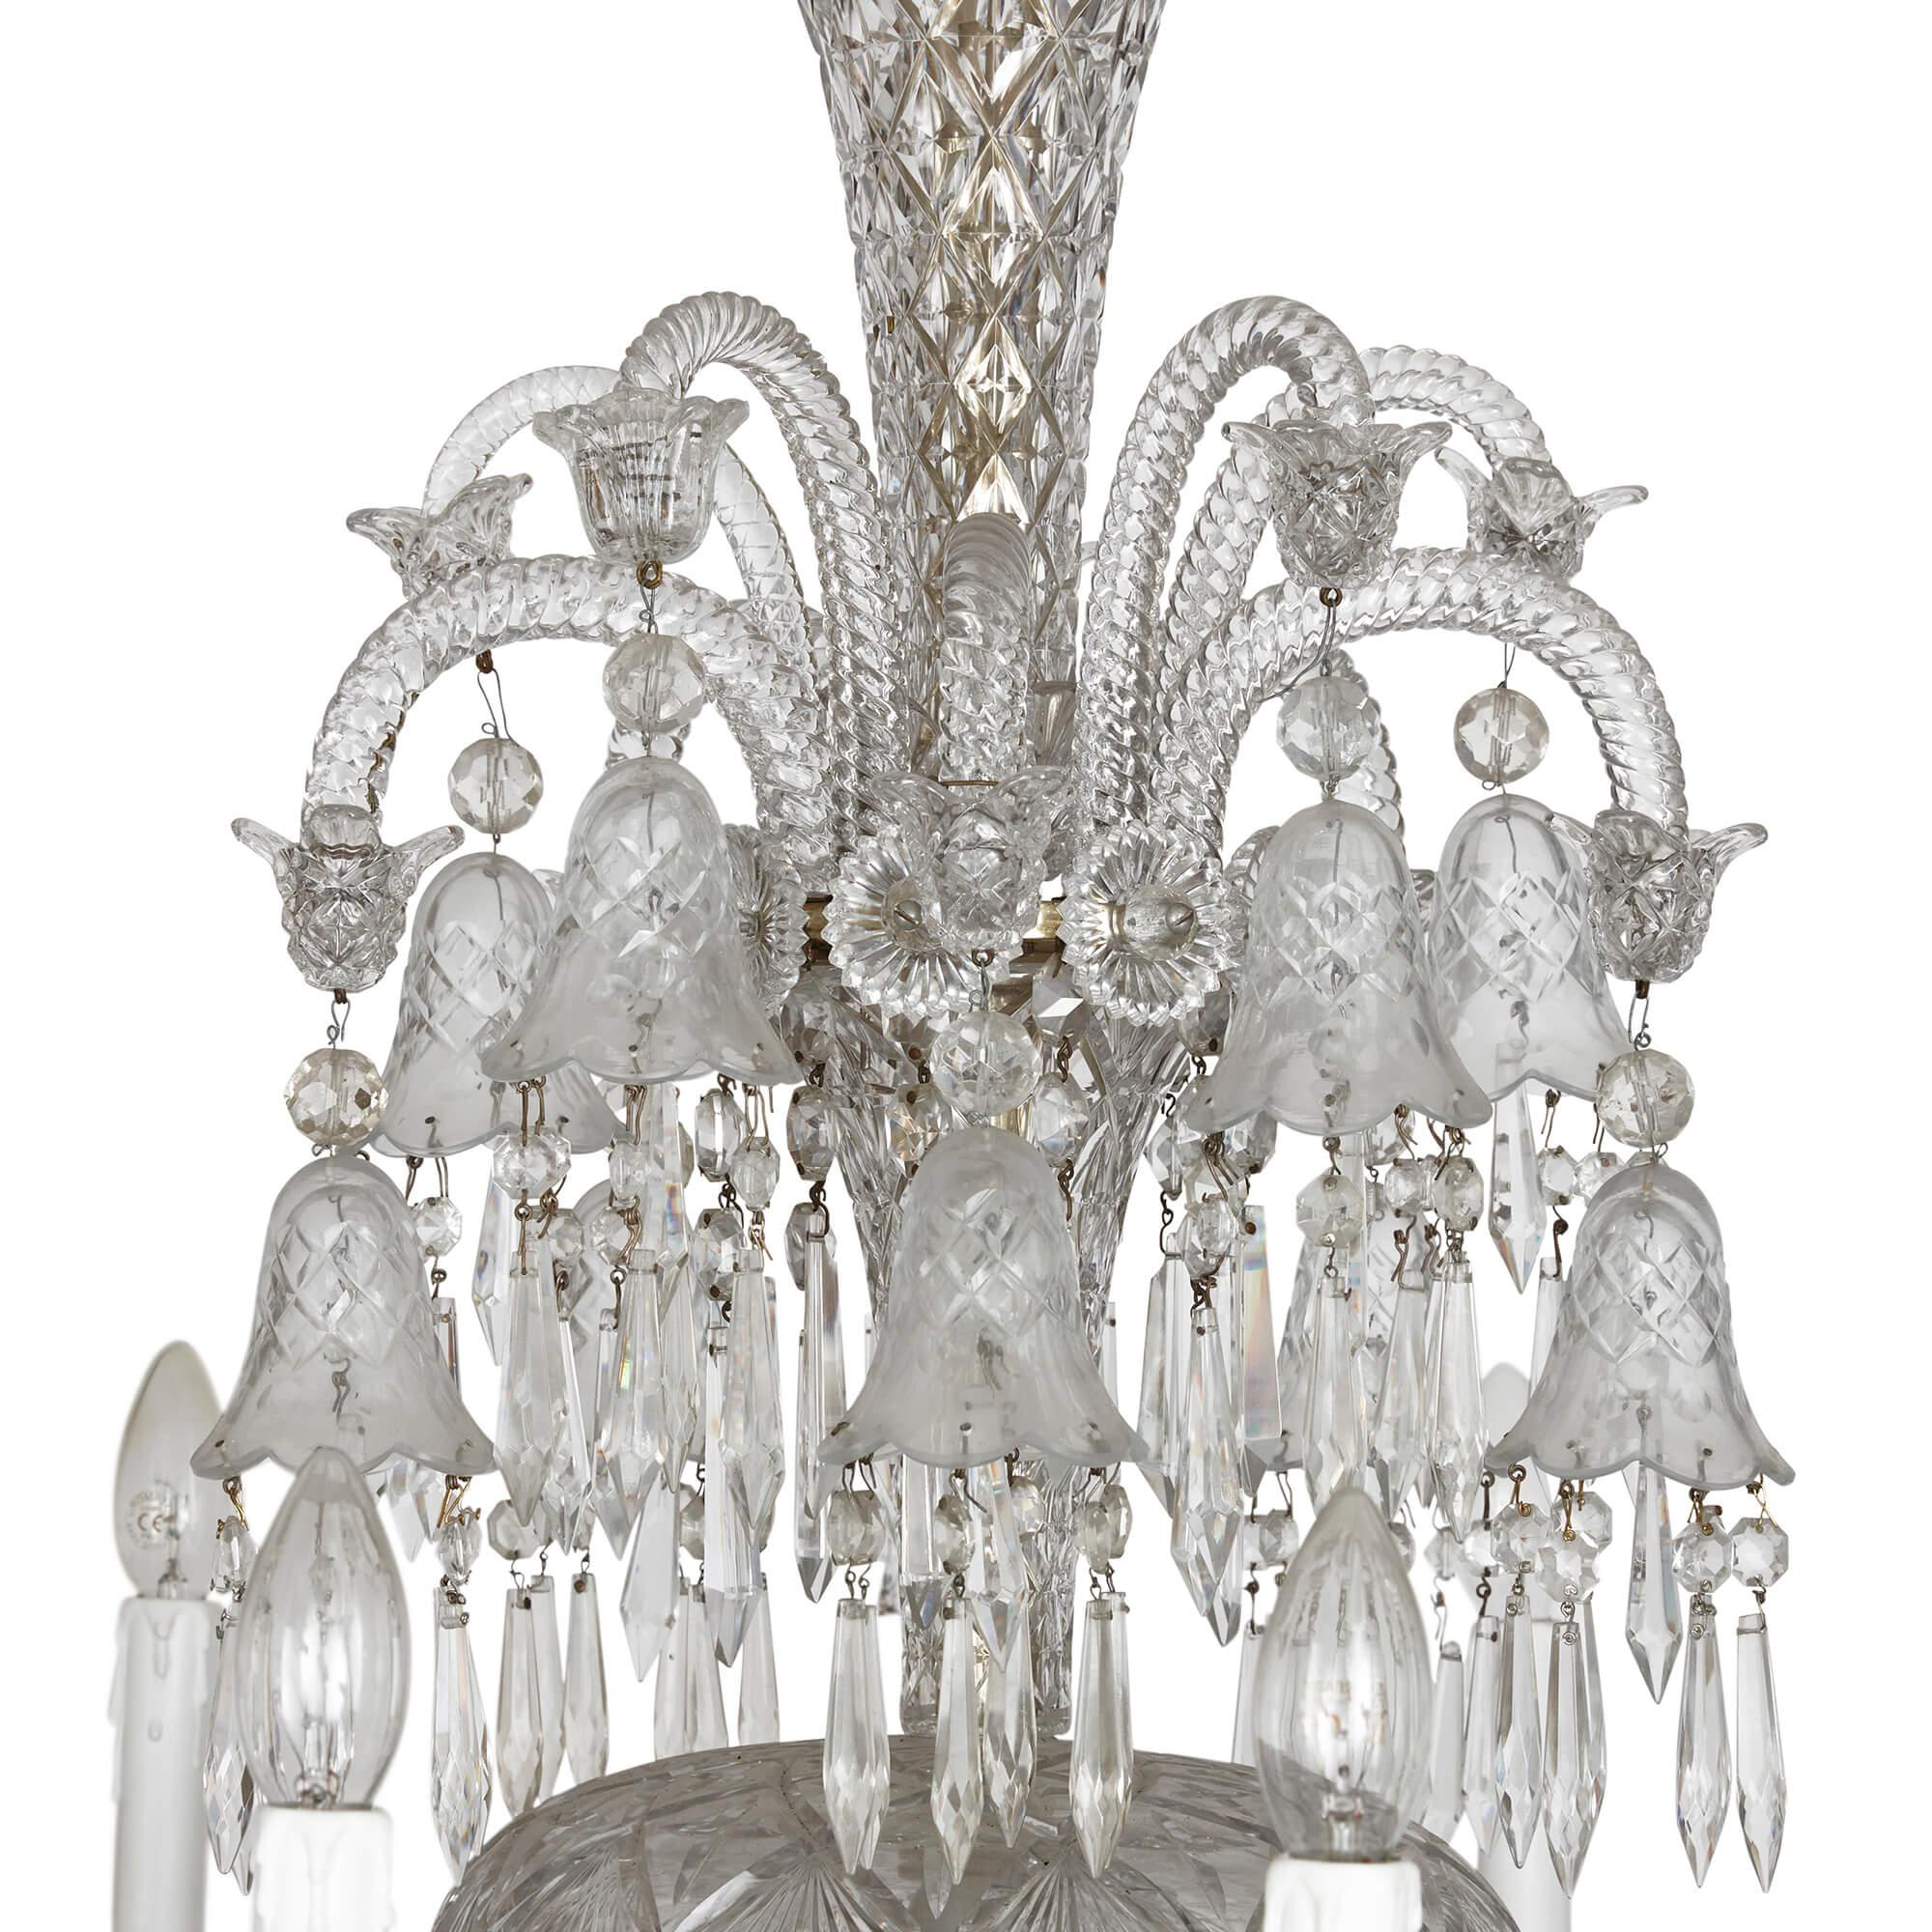 Large clear cut-glass chandelier by Baccarat 
French, Early 20th Century
Height 130cm, diameter 105cm

Brimming with fine detailing that displays extraordinary craftsmanship, this beautiful crystal chandelier highlights the skill of Baccarat’s